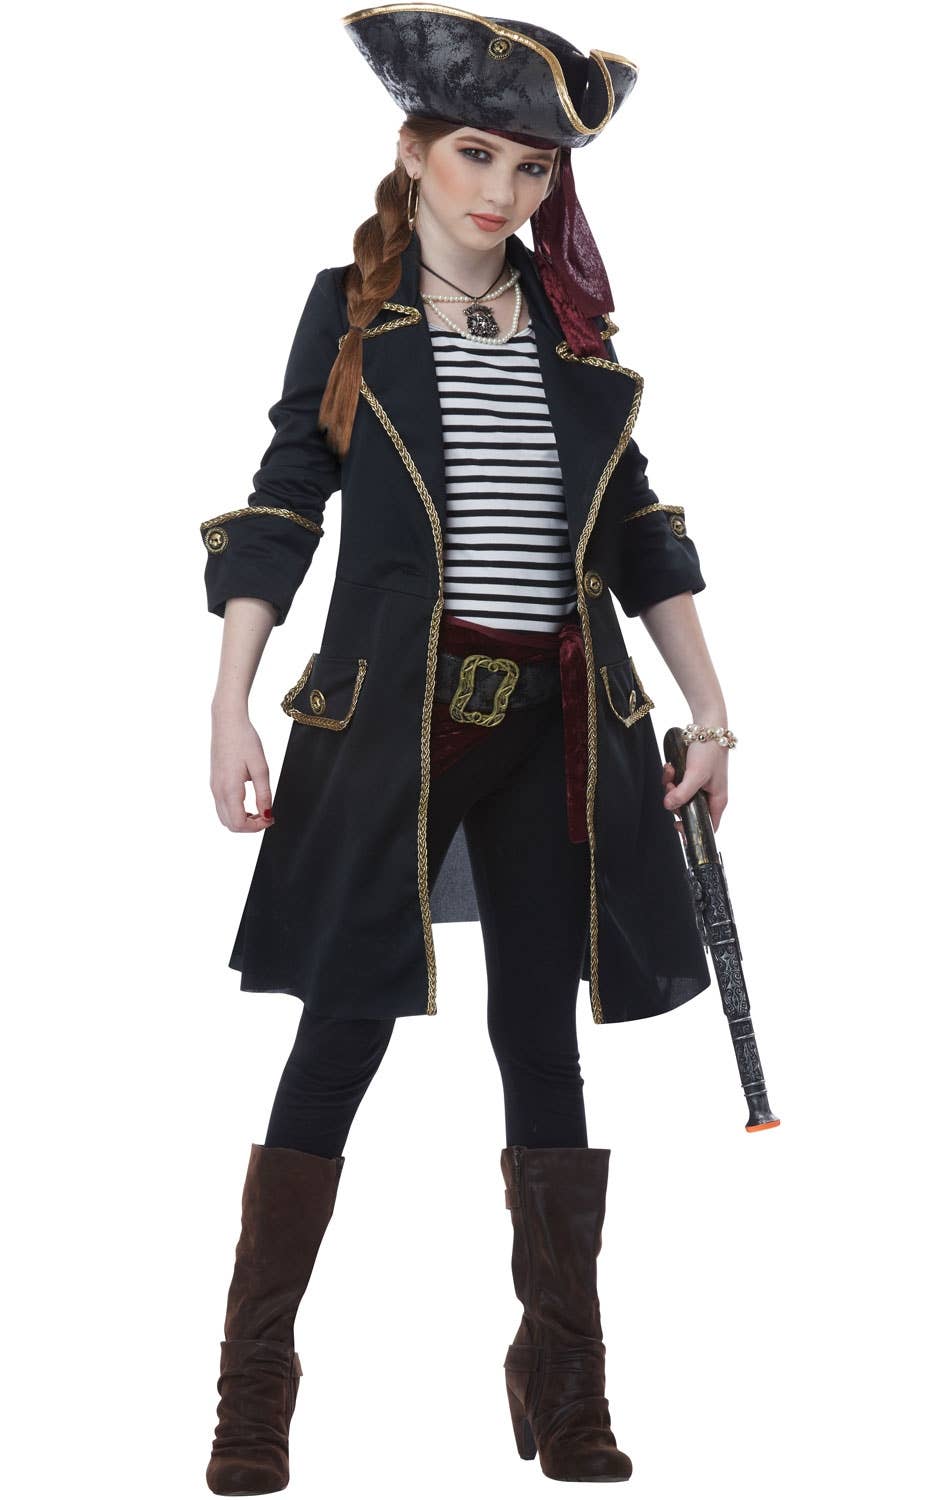 Captain Pirate Black and Gold Girls Fancy Dress Costume Main Image